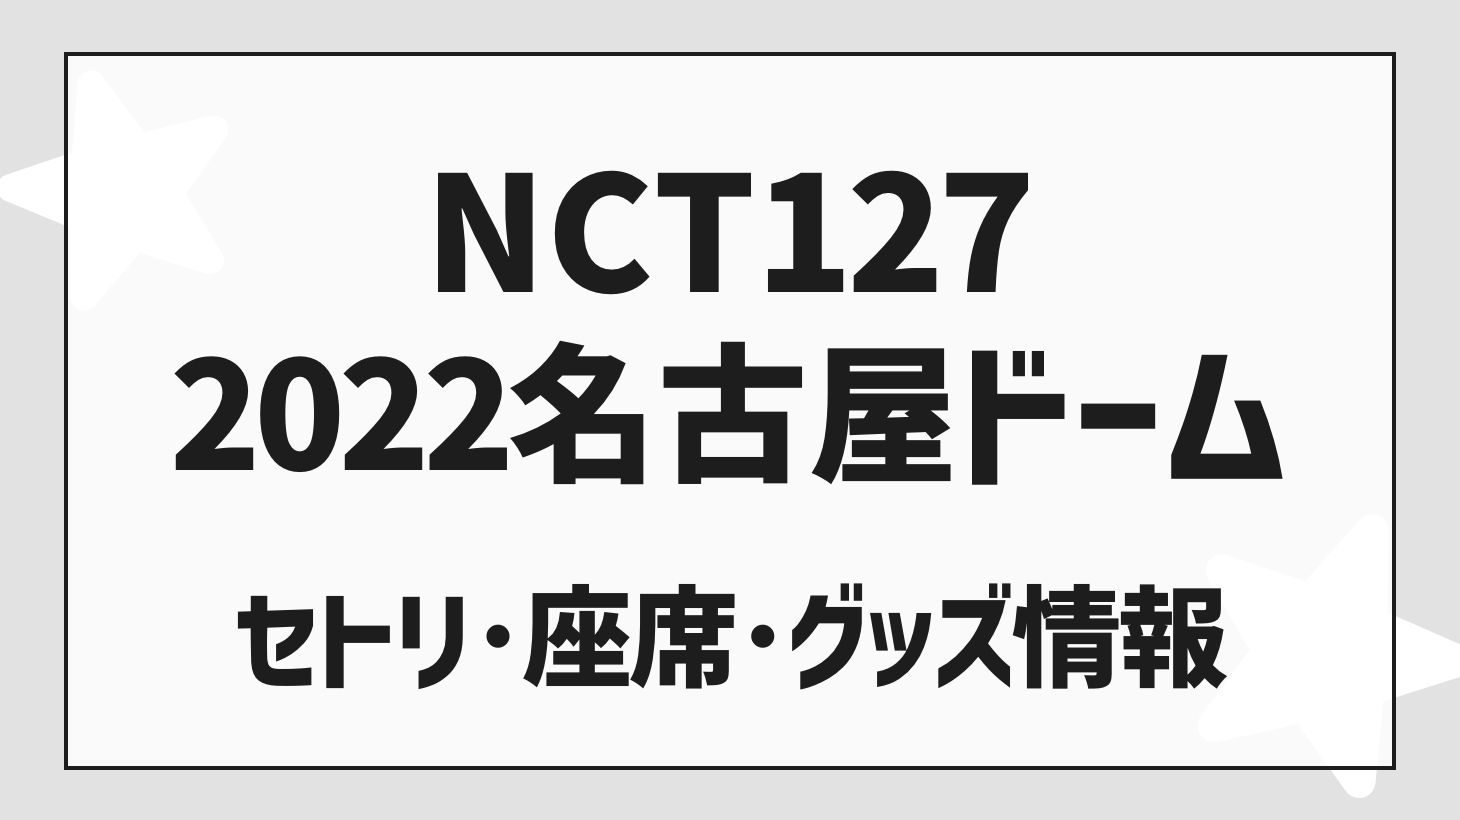 NCT 127 (Iritil) Live 2022 Nagoya Setlist / Seat / Goods Sold Out Report!